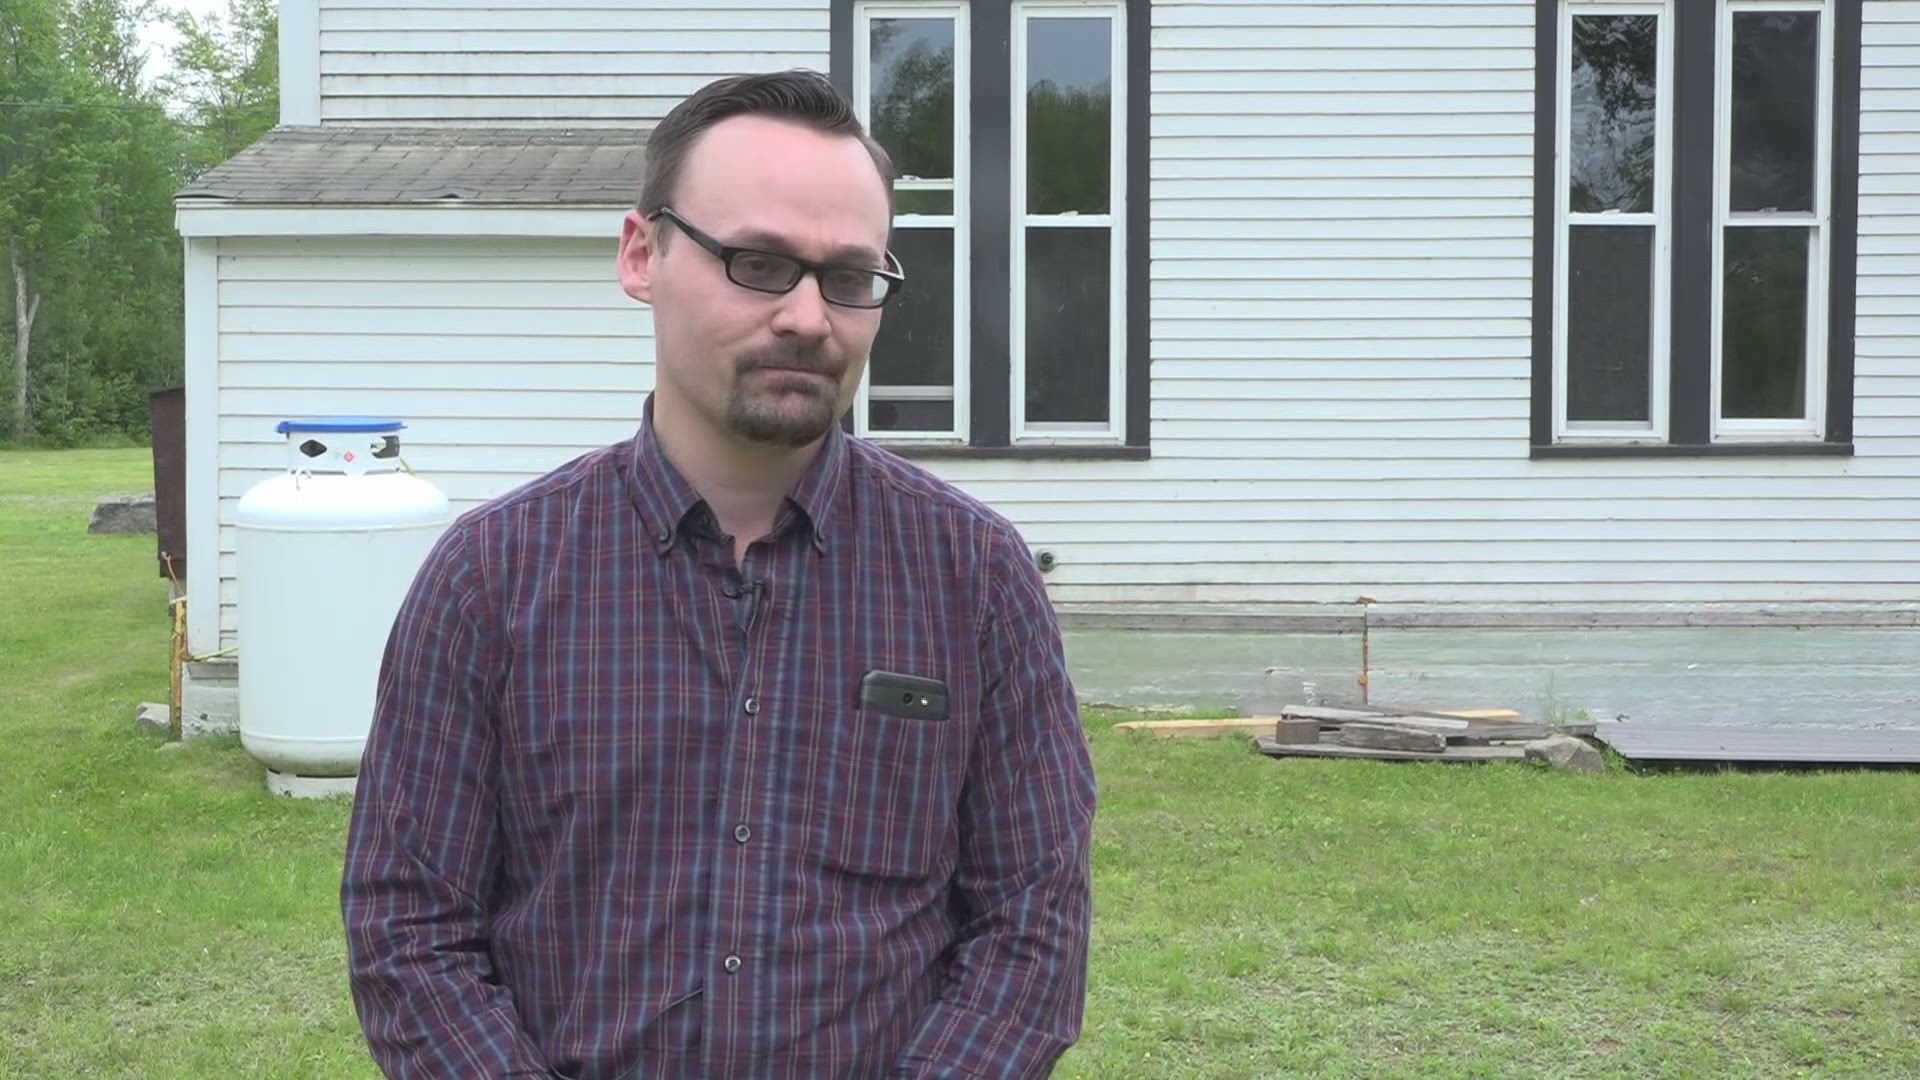 Pastor Barnes spoke with NEWS CENTER following a sign outside of his church being altered and a pro-life sign was stolen